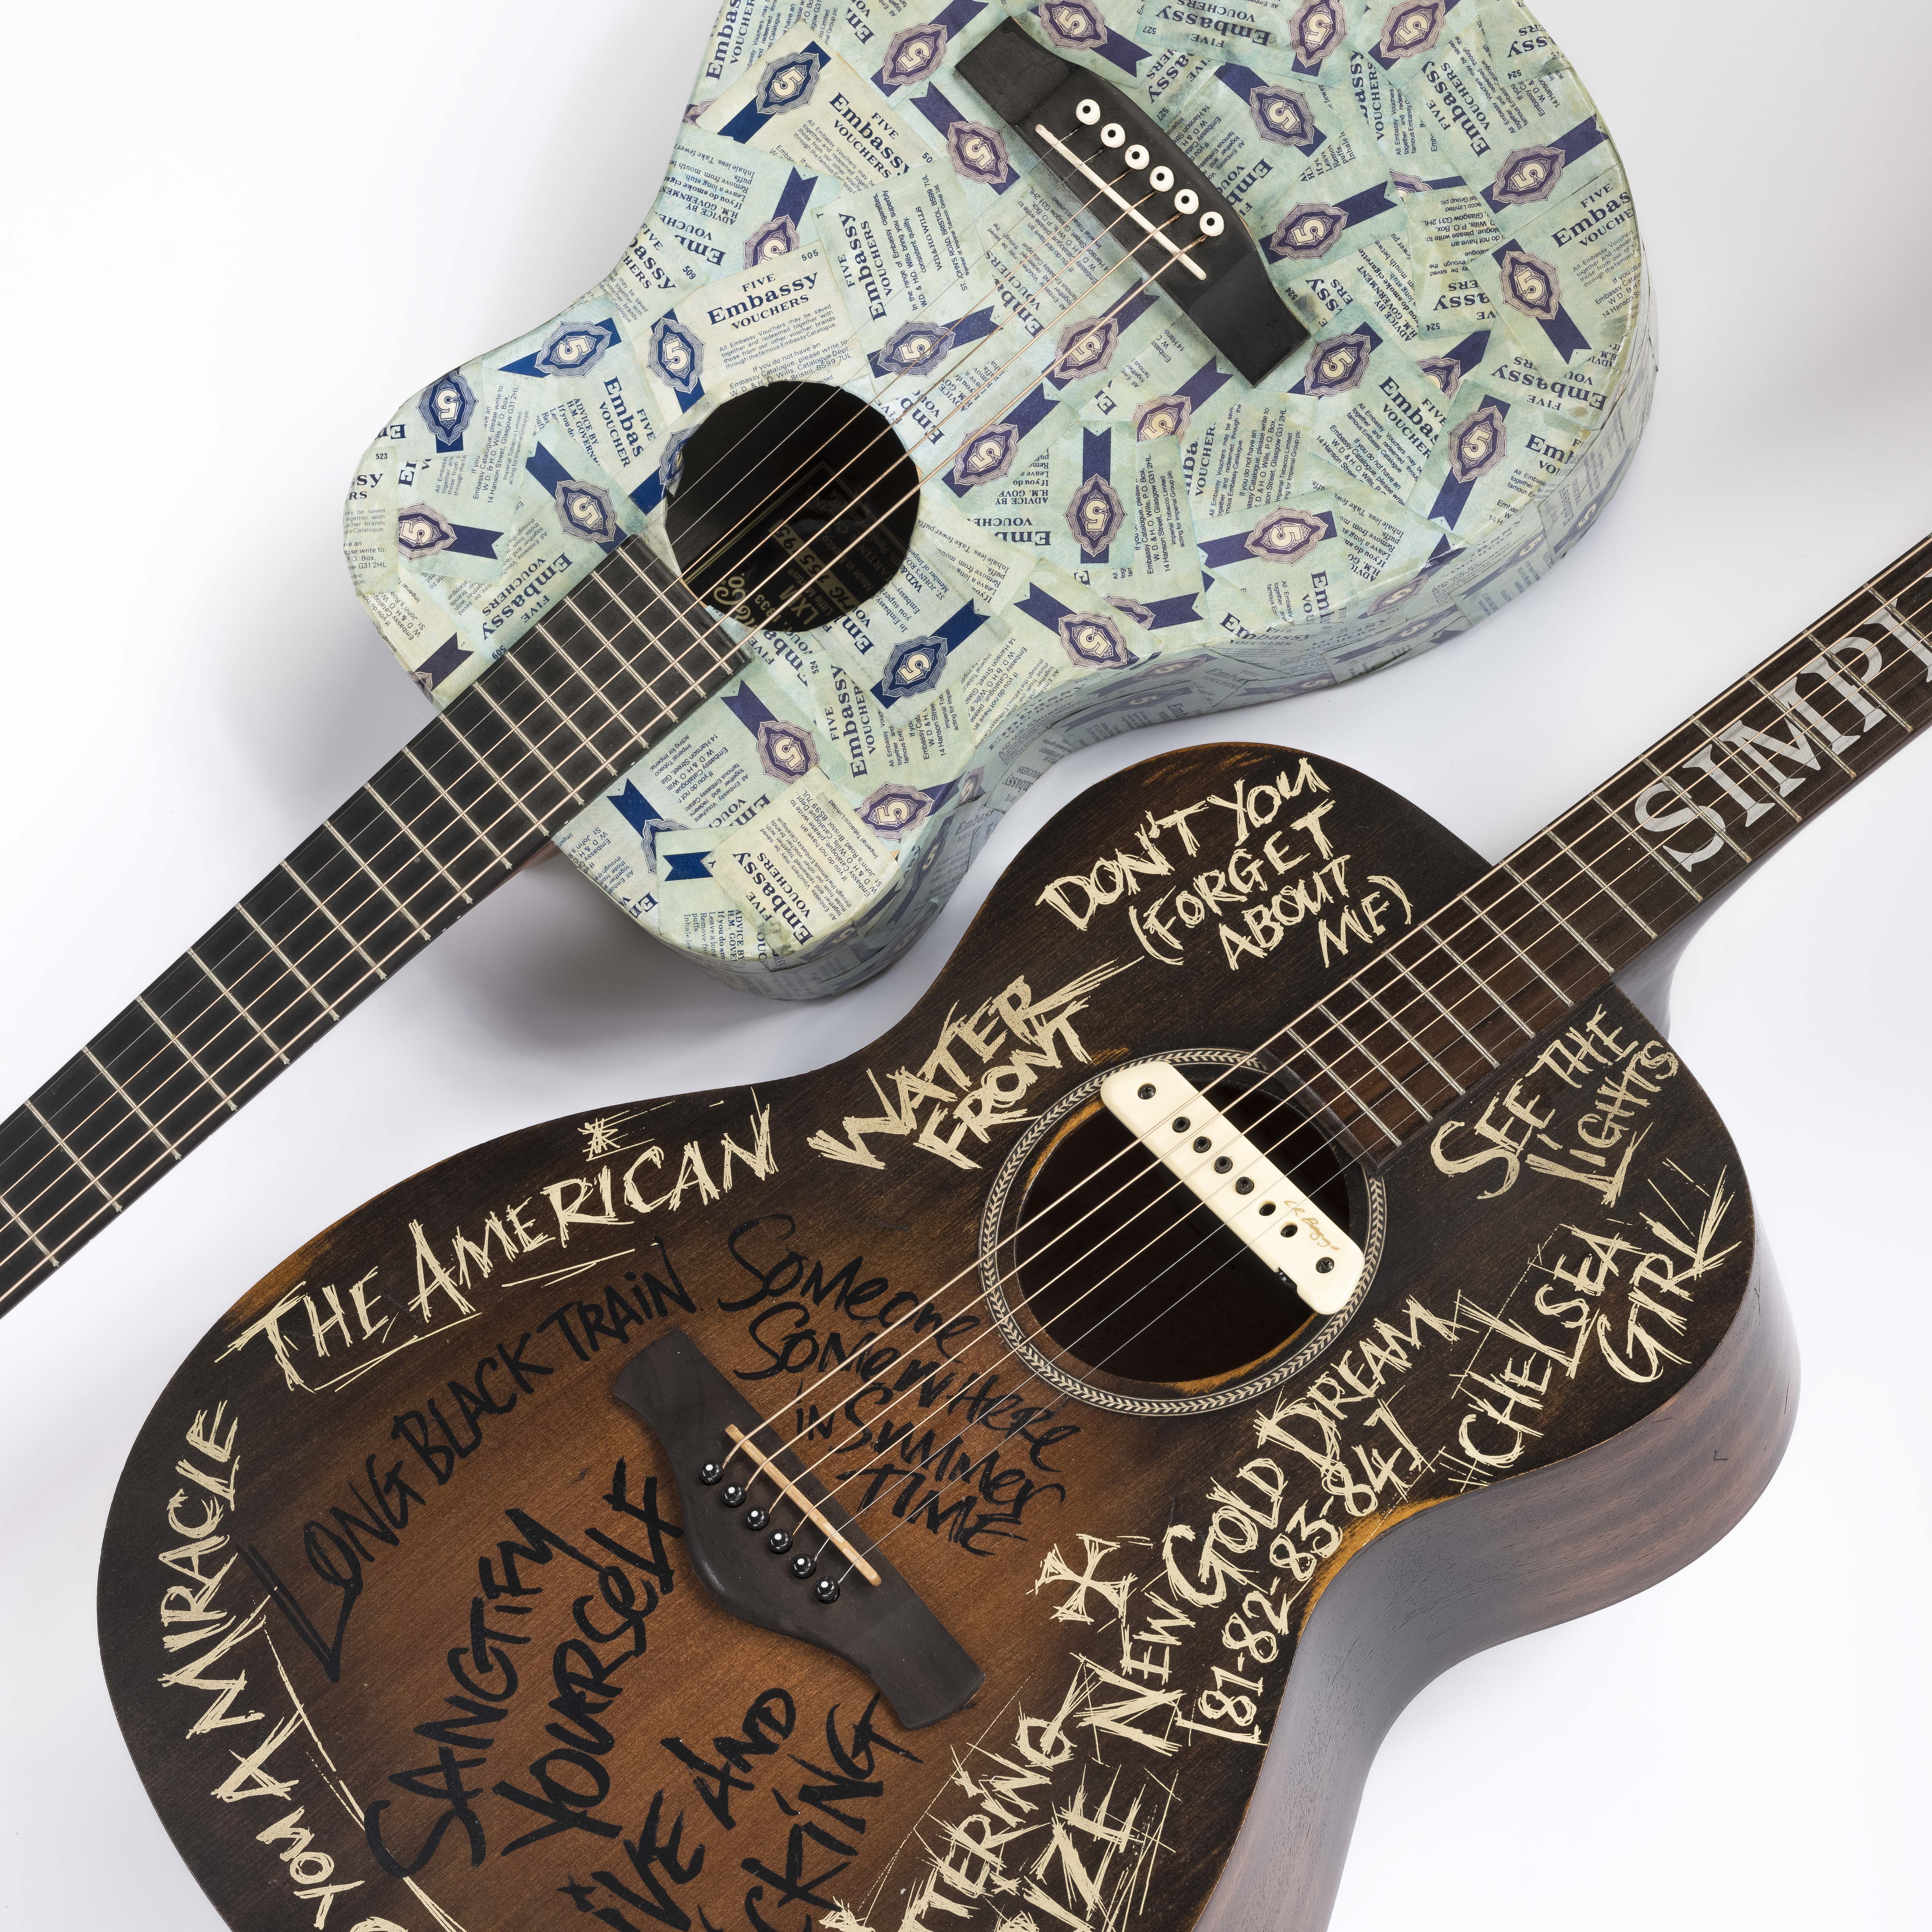 Simple Minds guitars on loan from Simple Minds.jpg